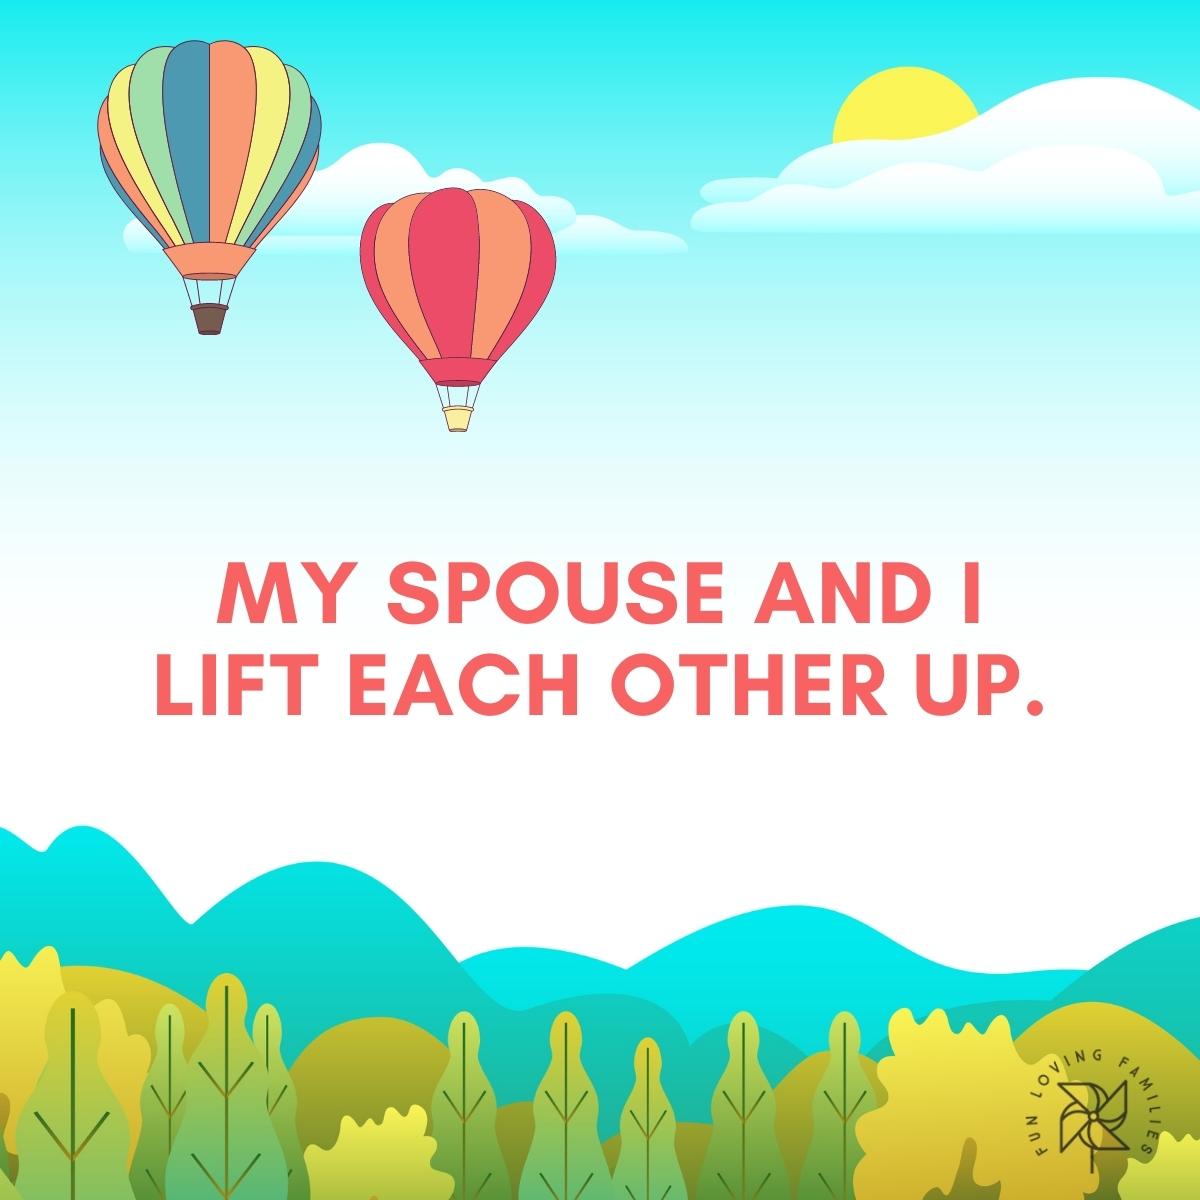 My spouse and I lift each other up affirmation